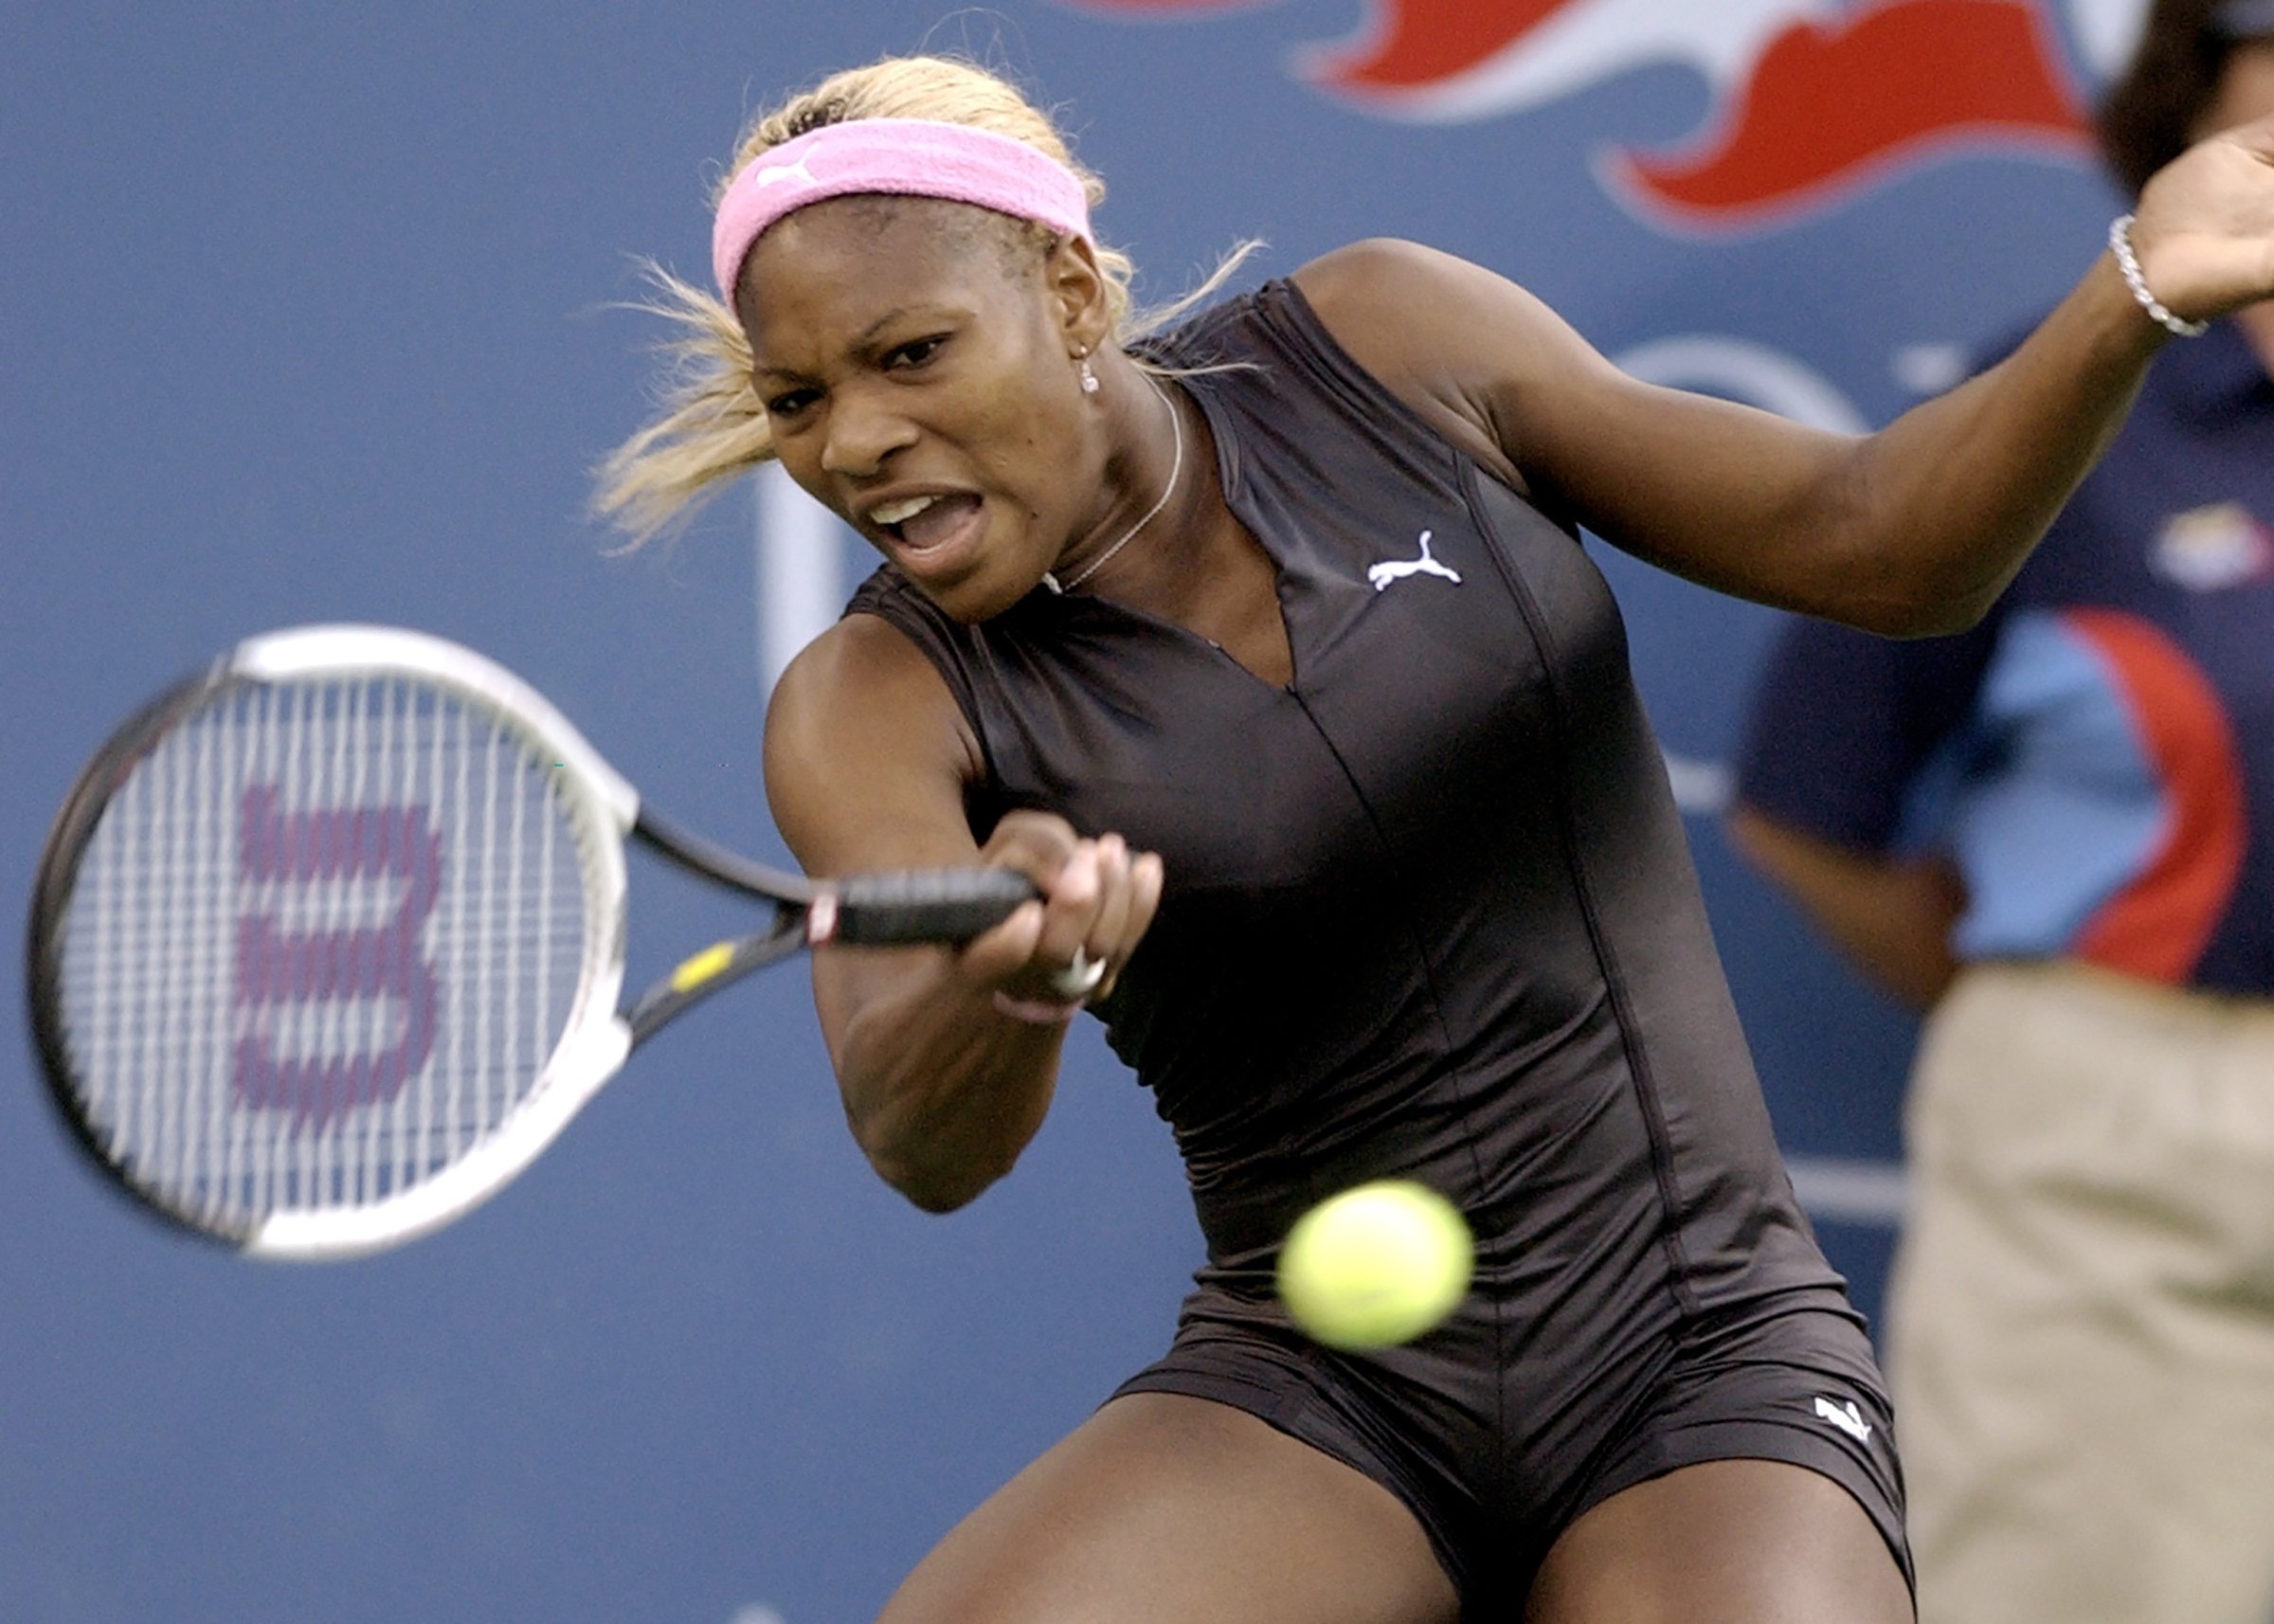 'Thinking too much about 24th Slam didn't help,' says Serena Williams